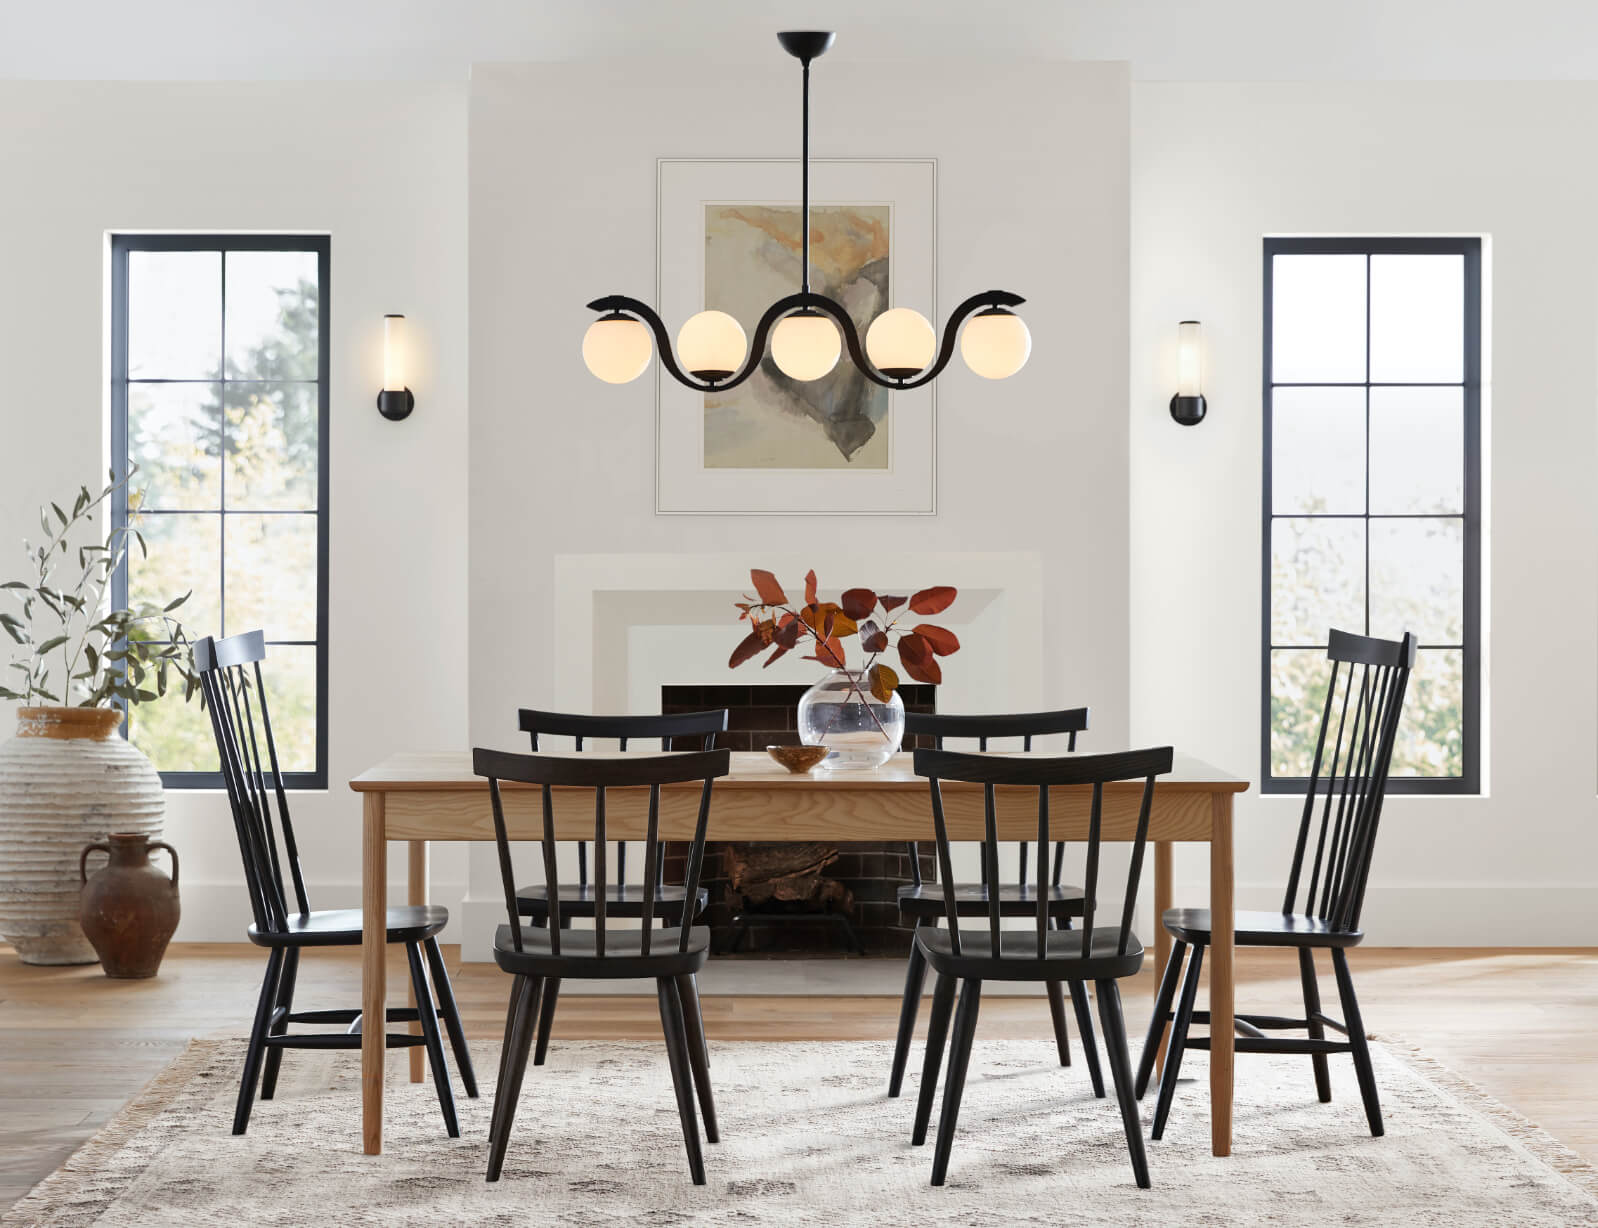 How To Choose Dining Room Lighting, Dining Room Table Chandelier Ideas